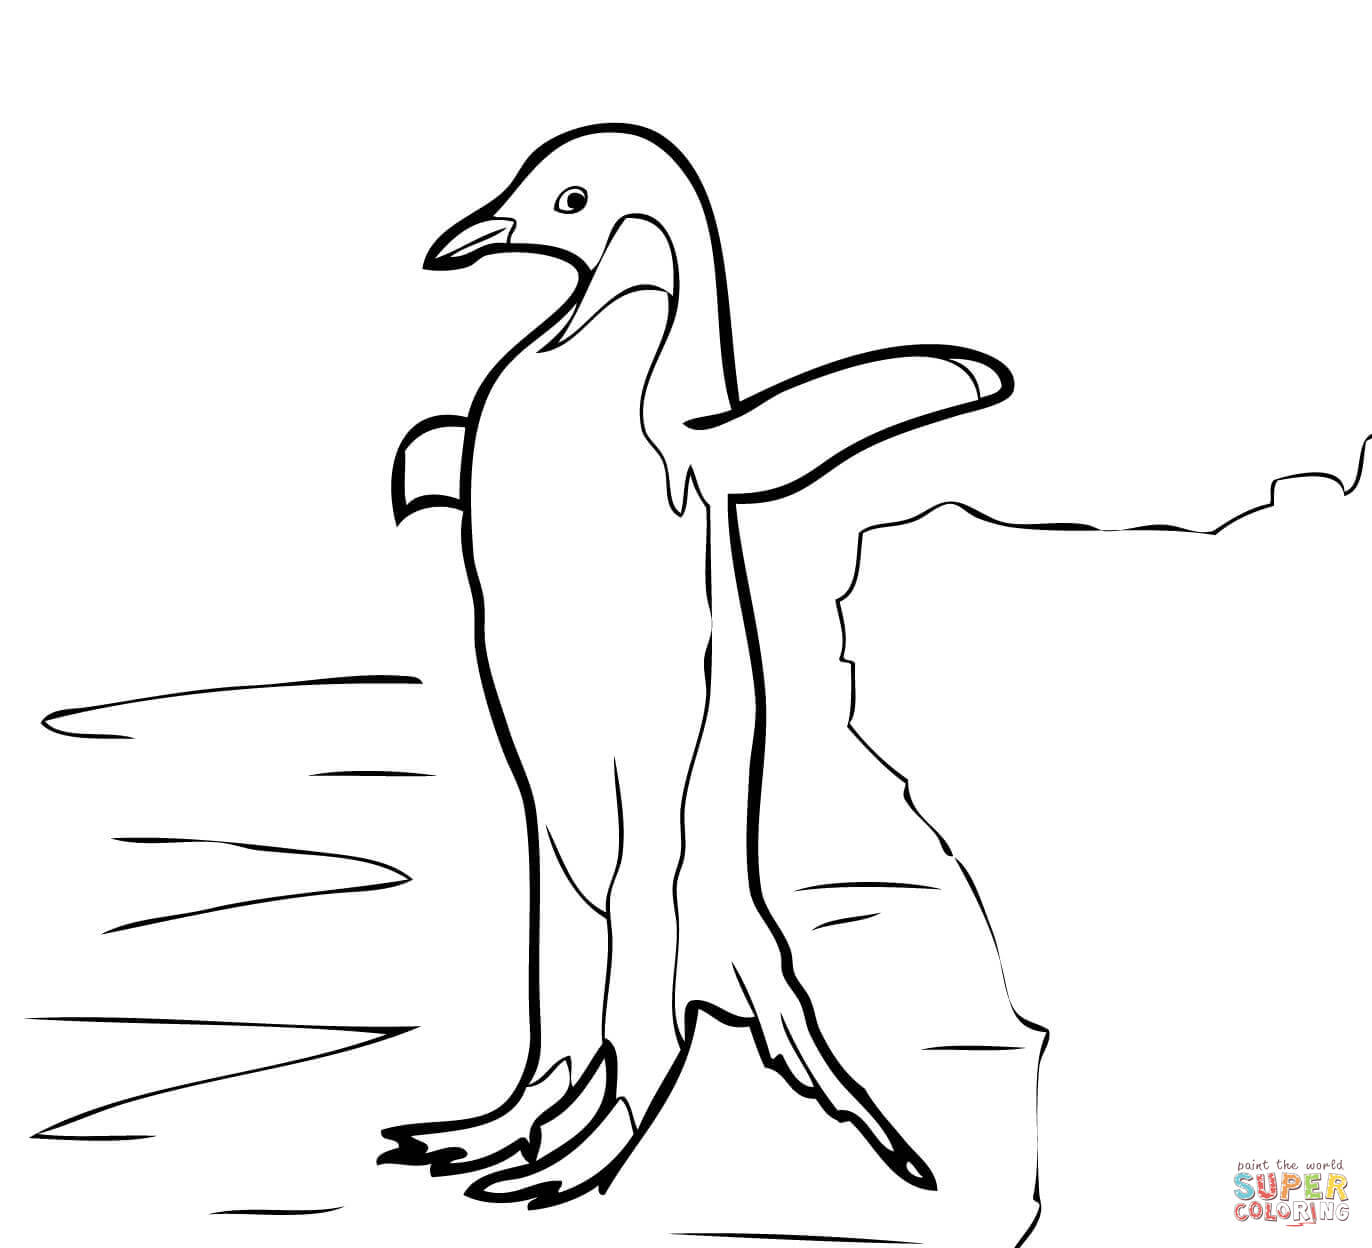 Adelie Penguin coloring page | Free Printable Coloring Pages